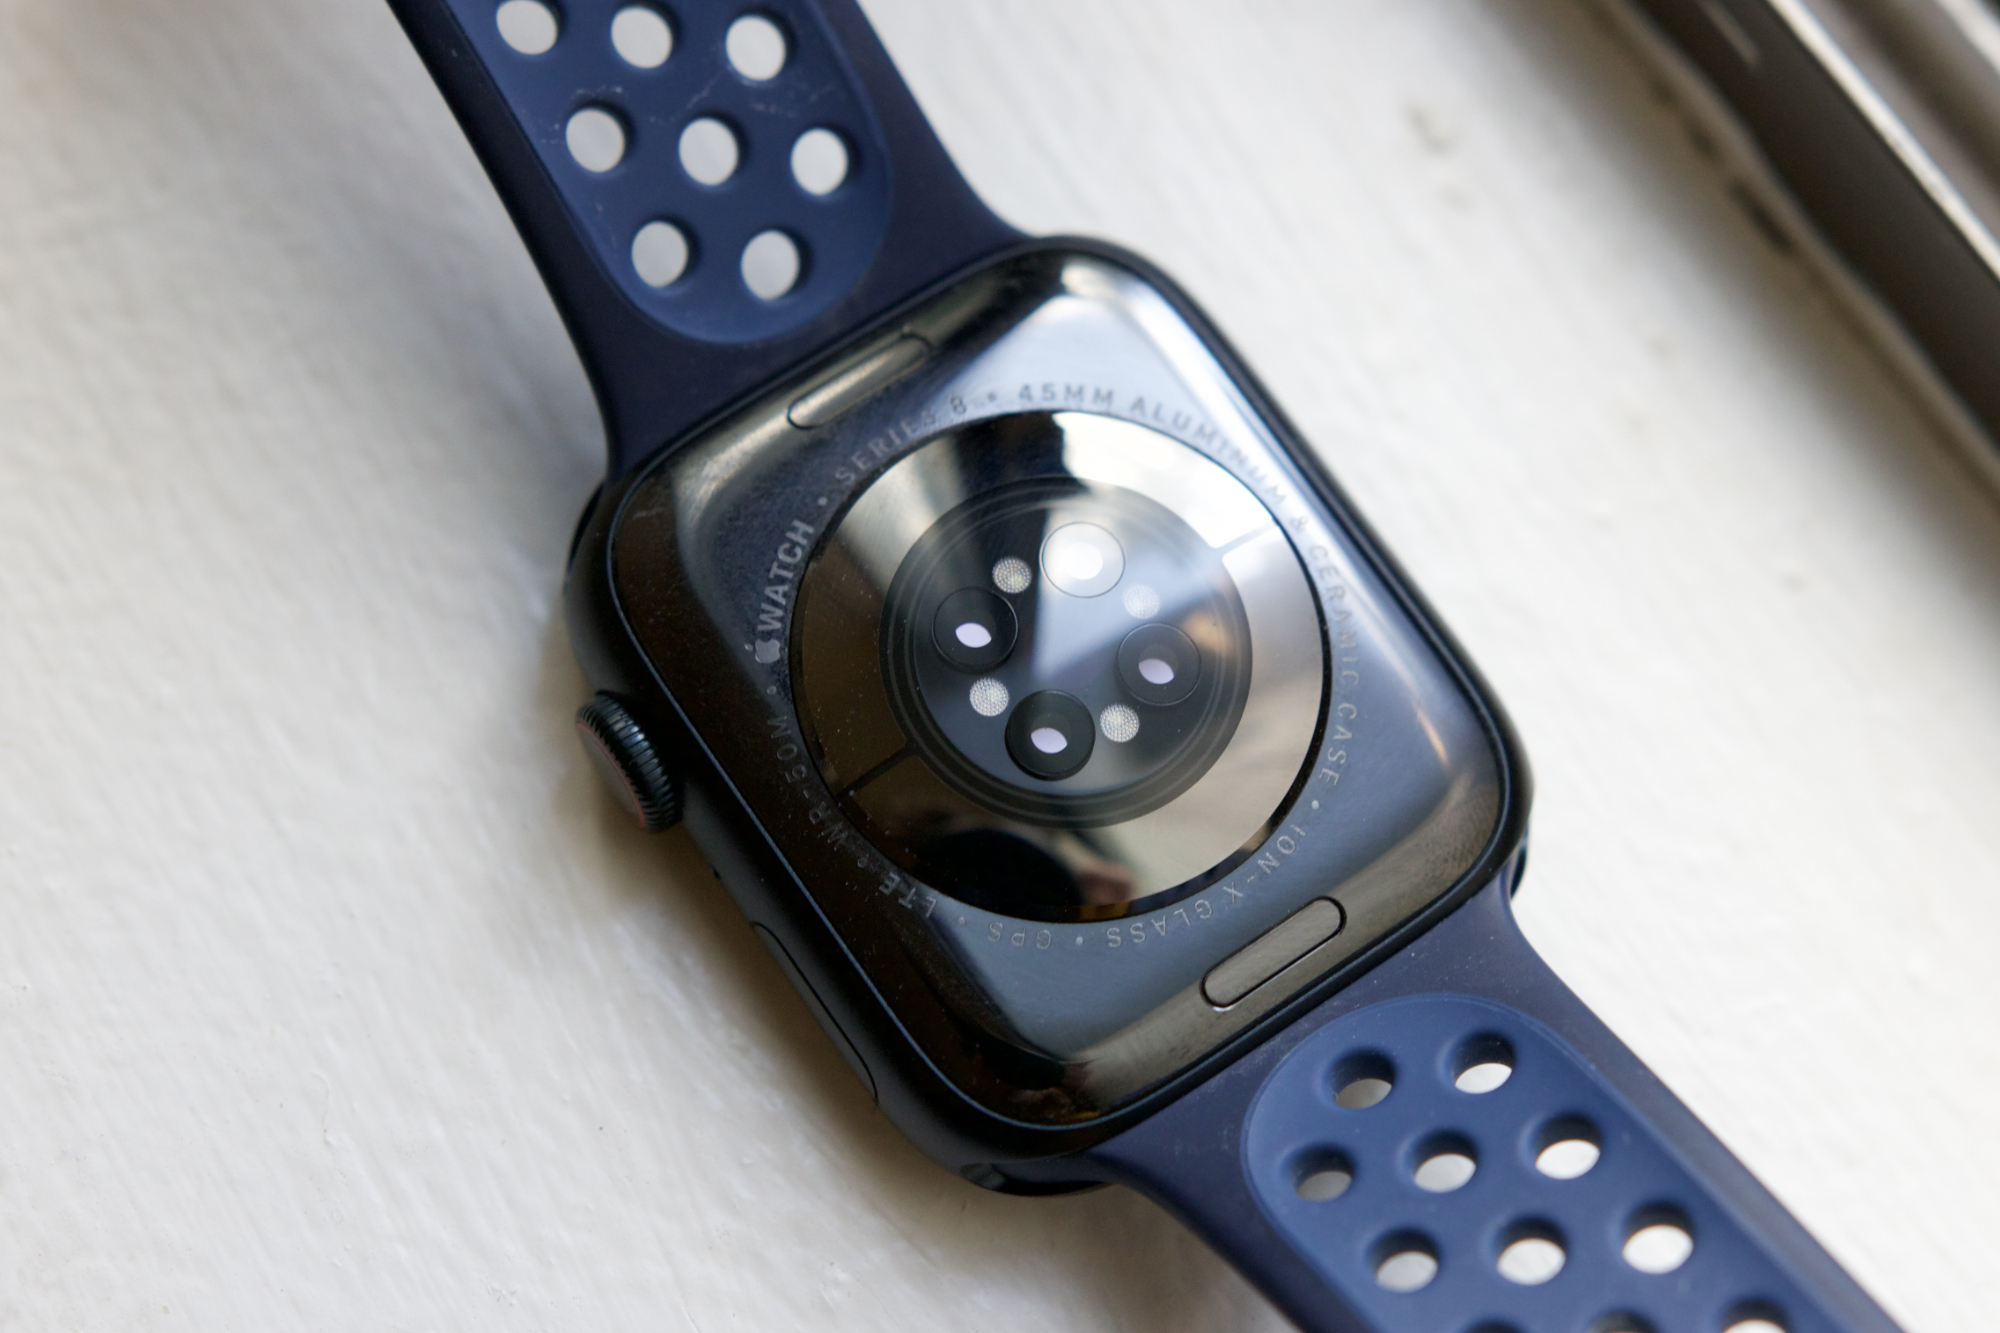 Apple Watch Series 8 Review: A Spectacular, Everyday Smartwatch